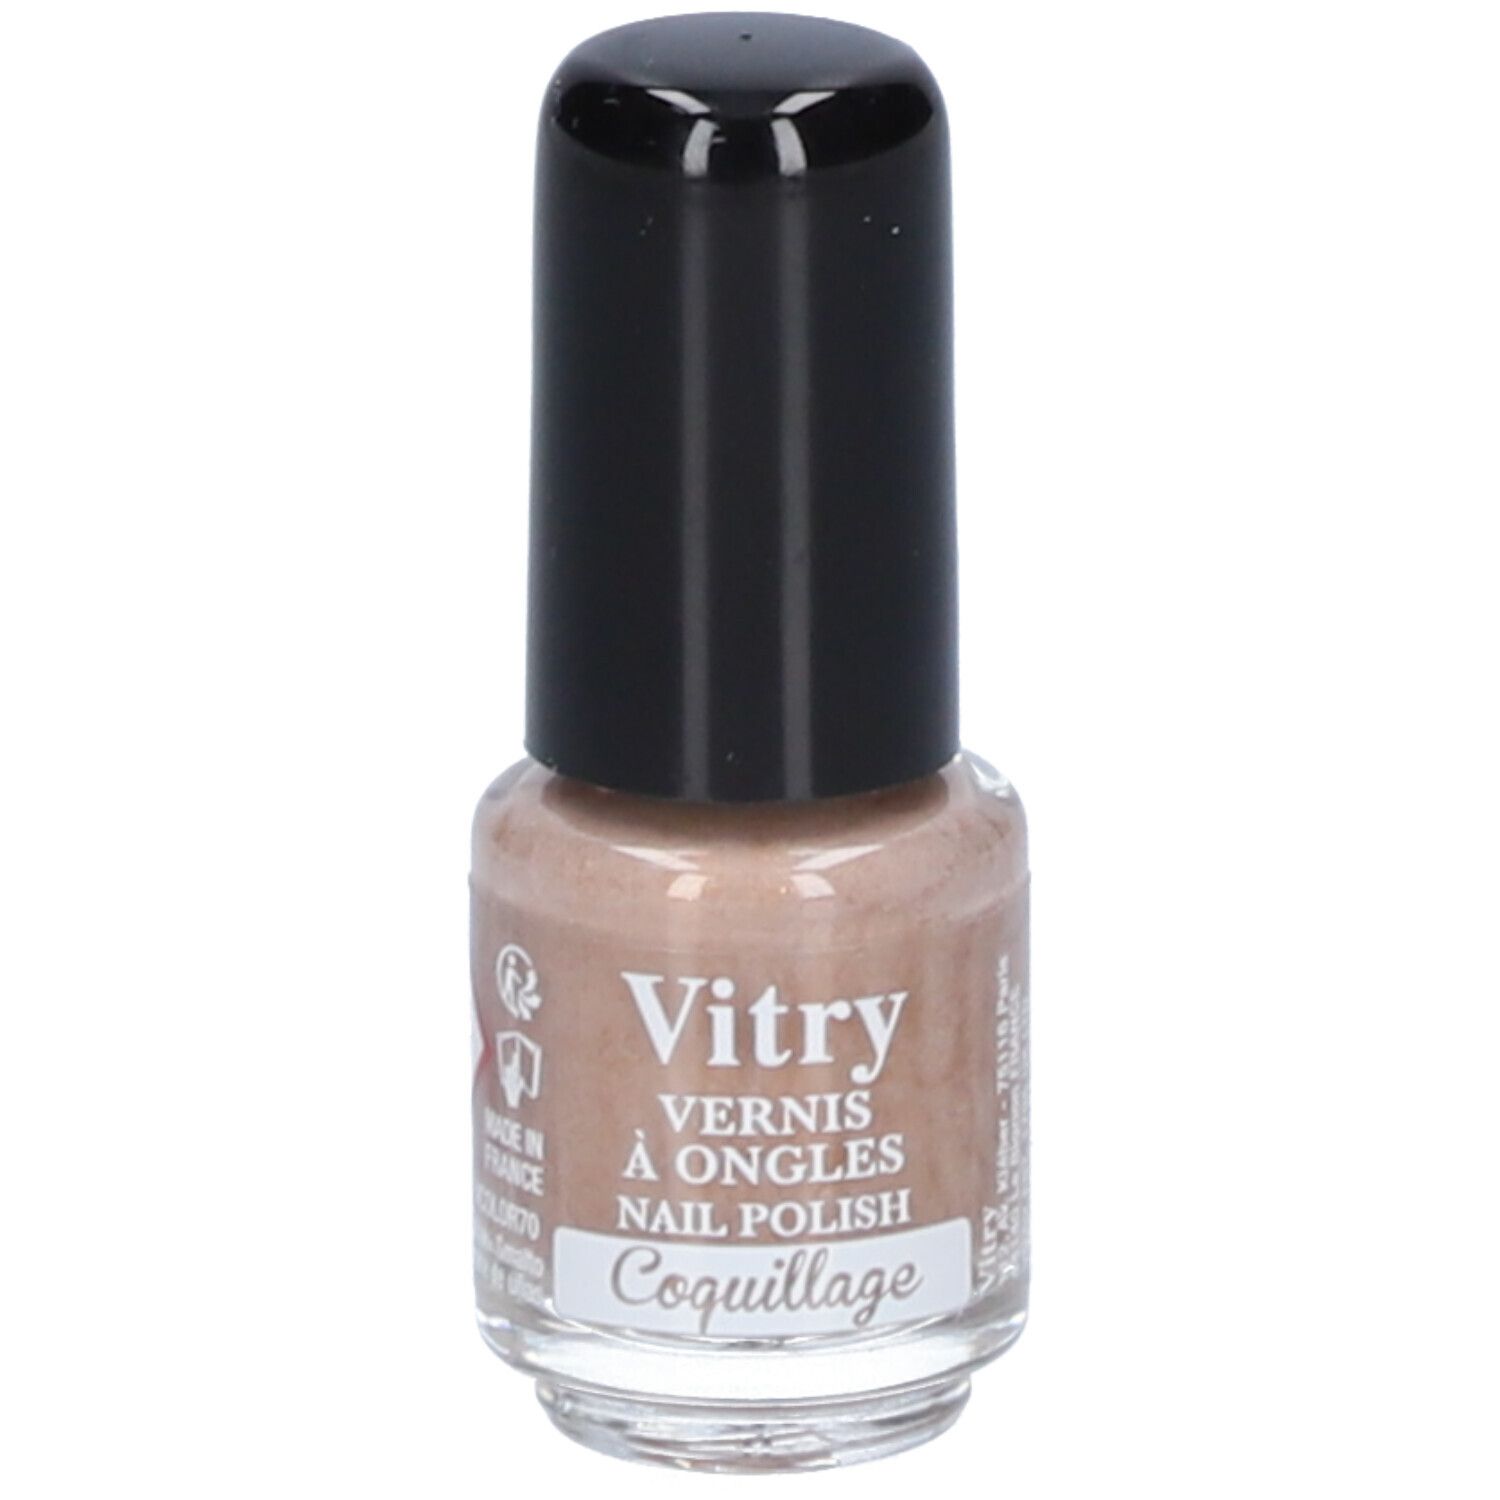 Vitry Vernis à ongles Coquillage N°132